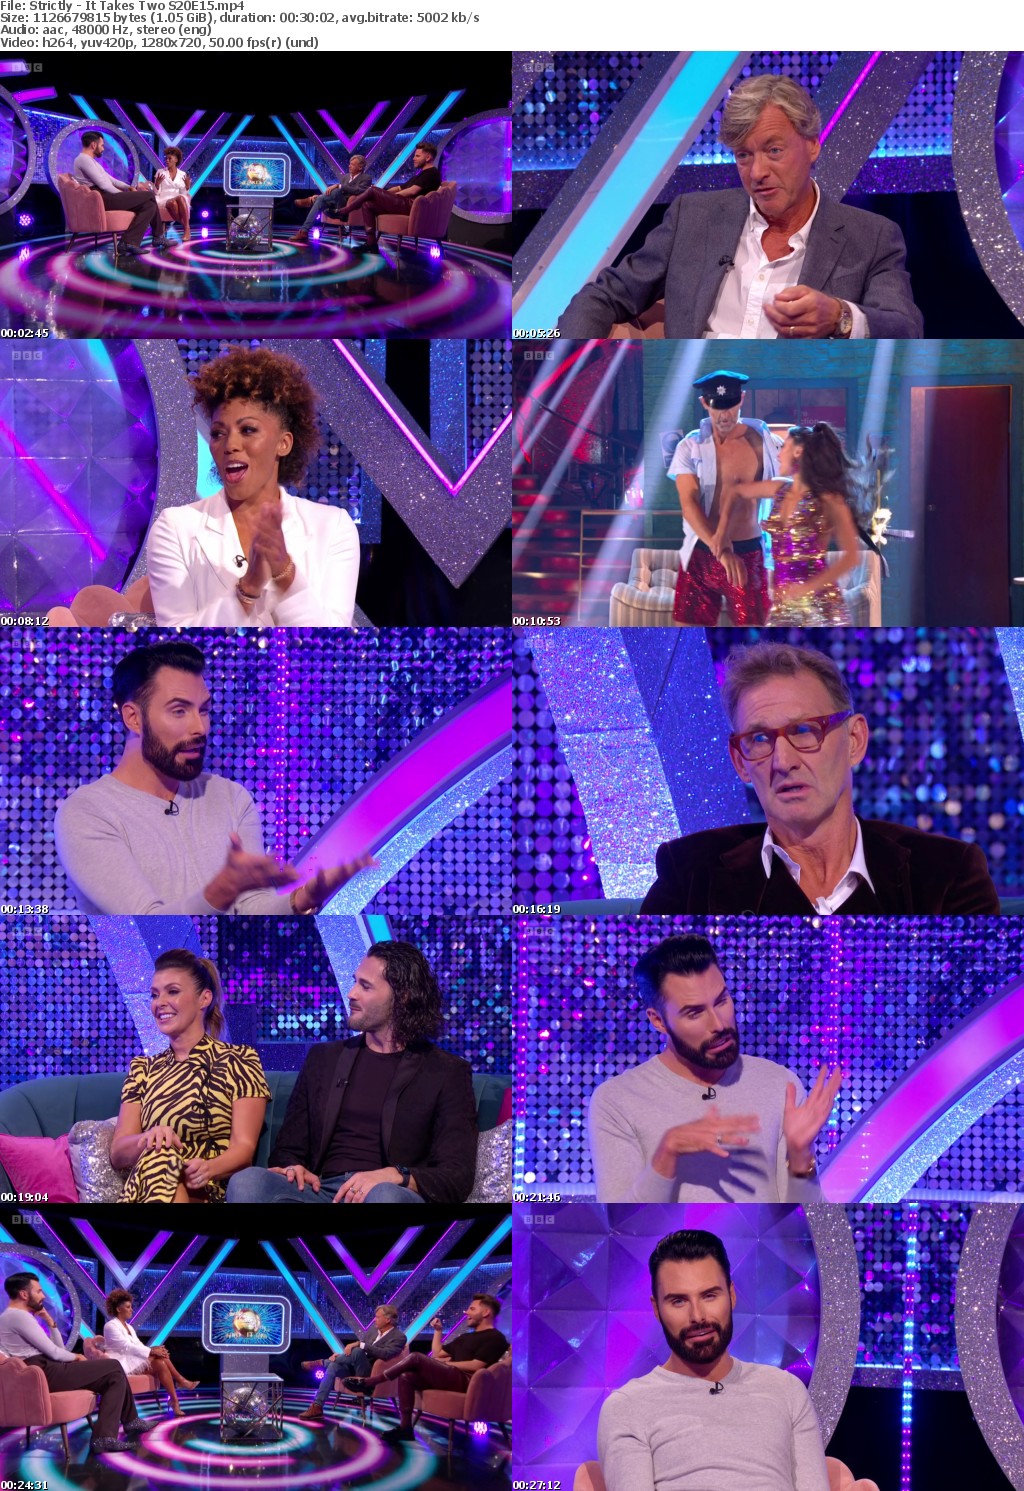 Strictly - It Takes Two S20E15 (1280x720p HD, 50fps, soft Eng subs)